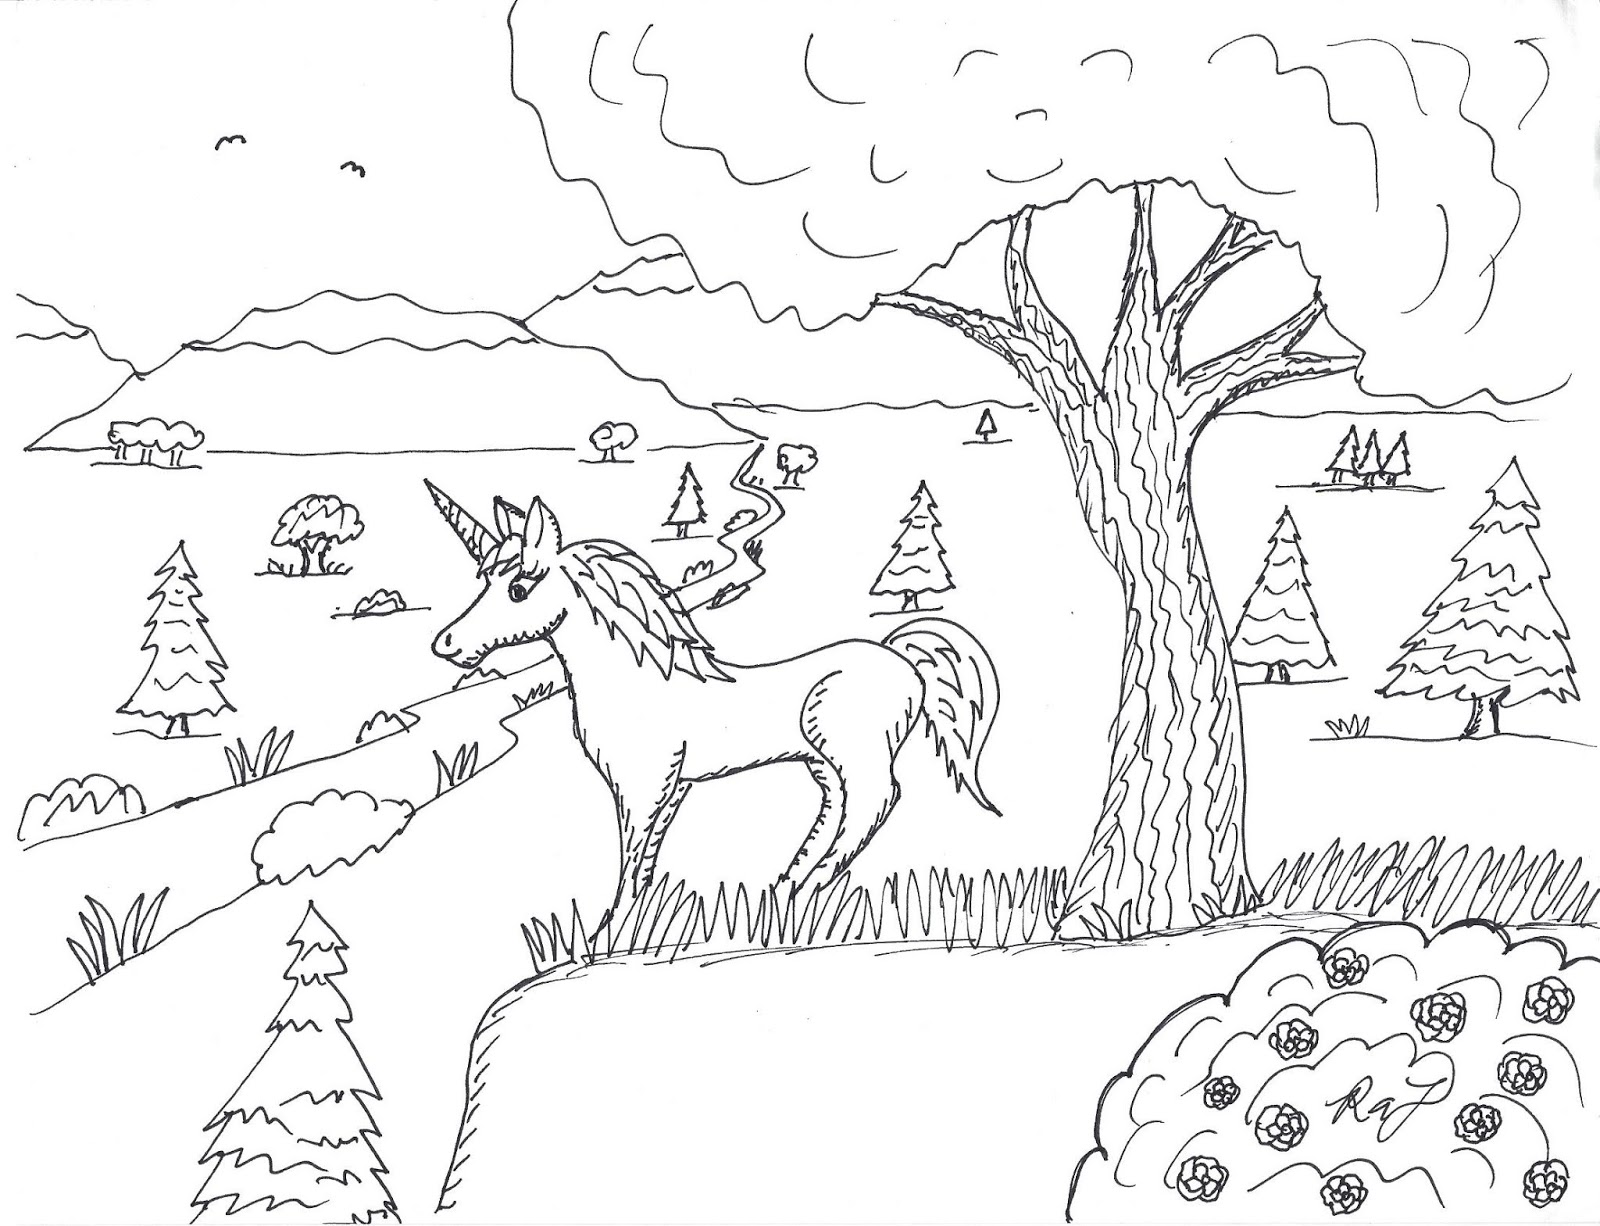 Robin's Great Coloring Pages: Unicorn coloring pages for Young Kids